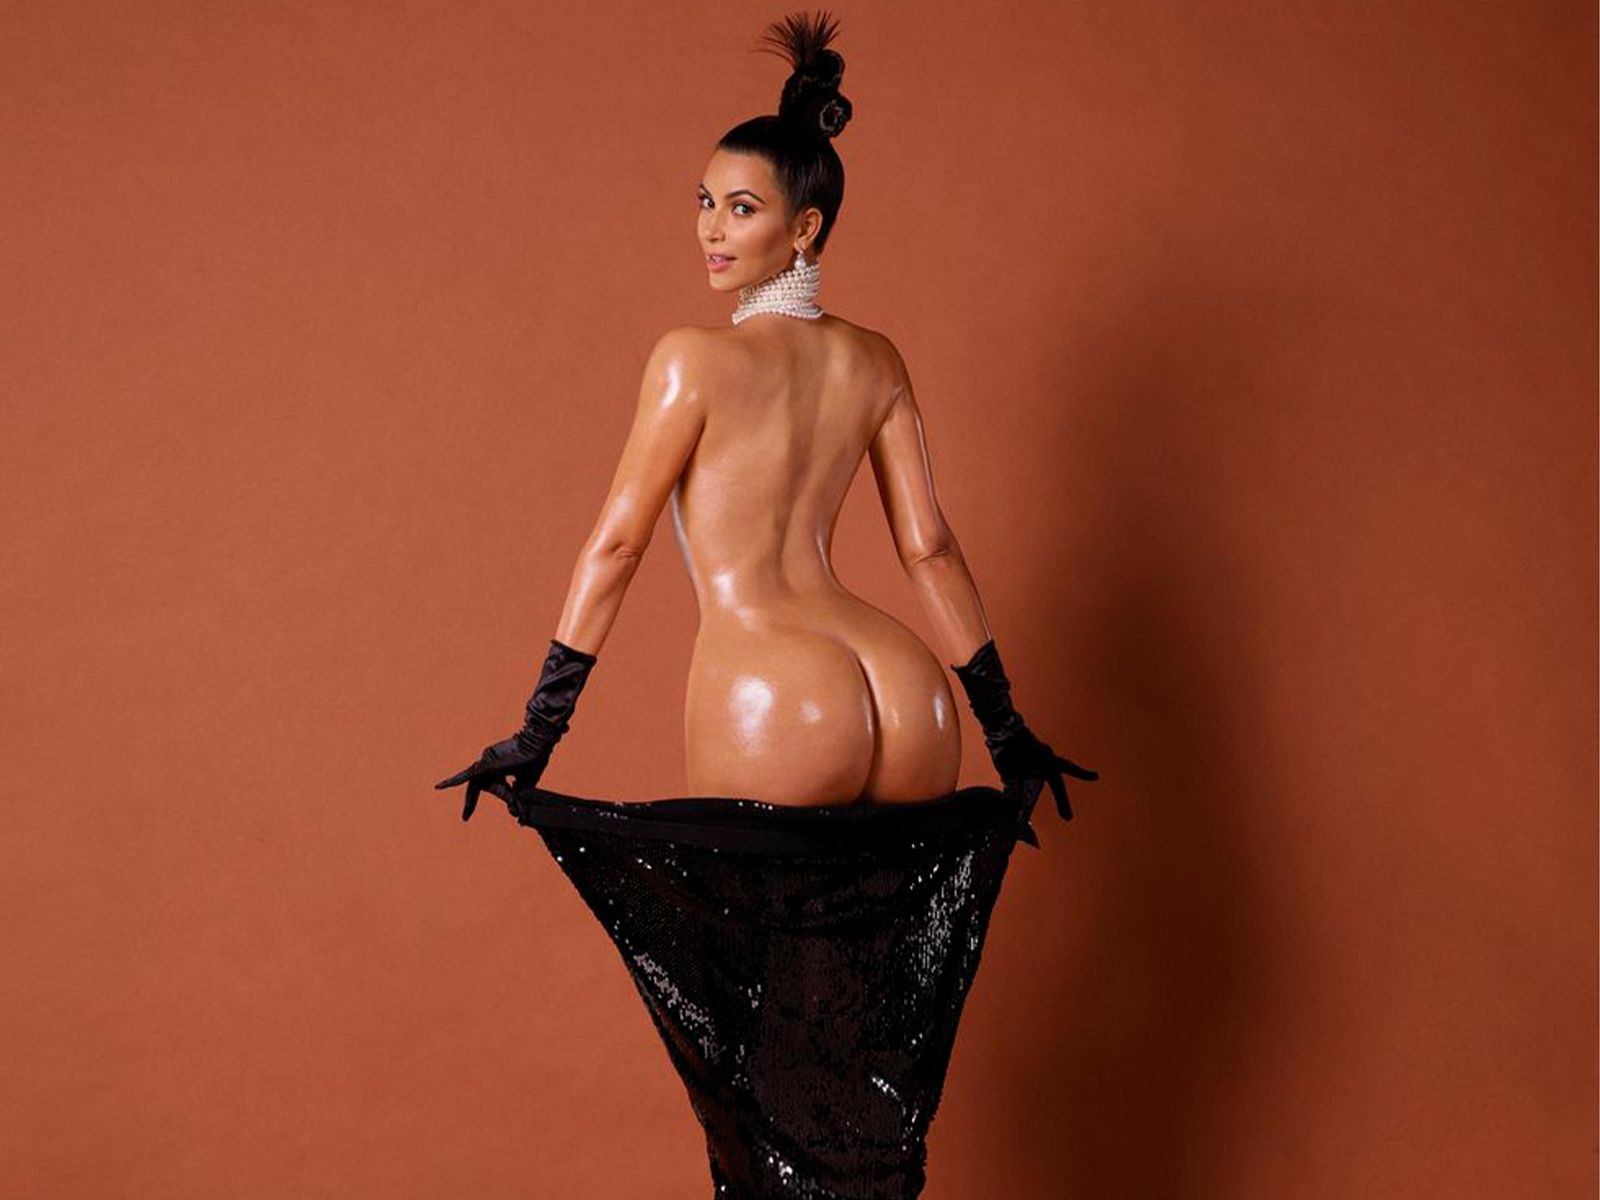 And PornHub wonders… Why Kim Kardashian can upload butts to IG and they can’t?